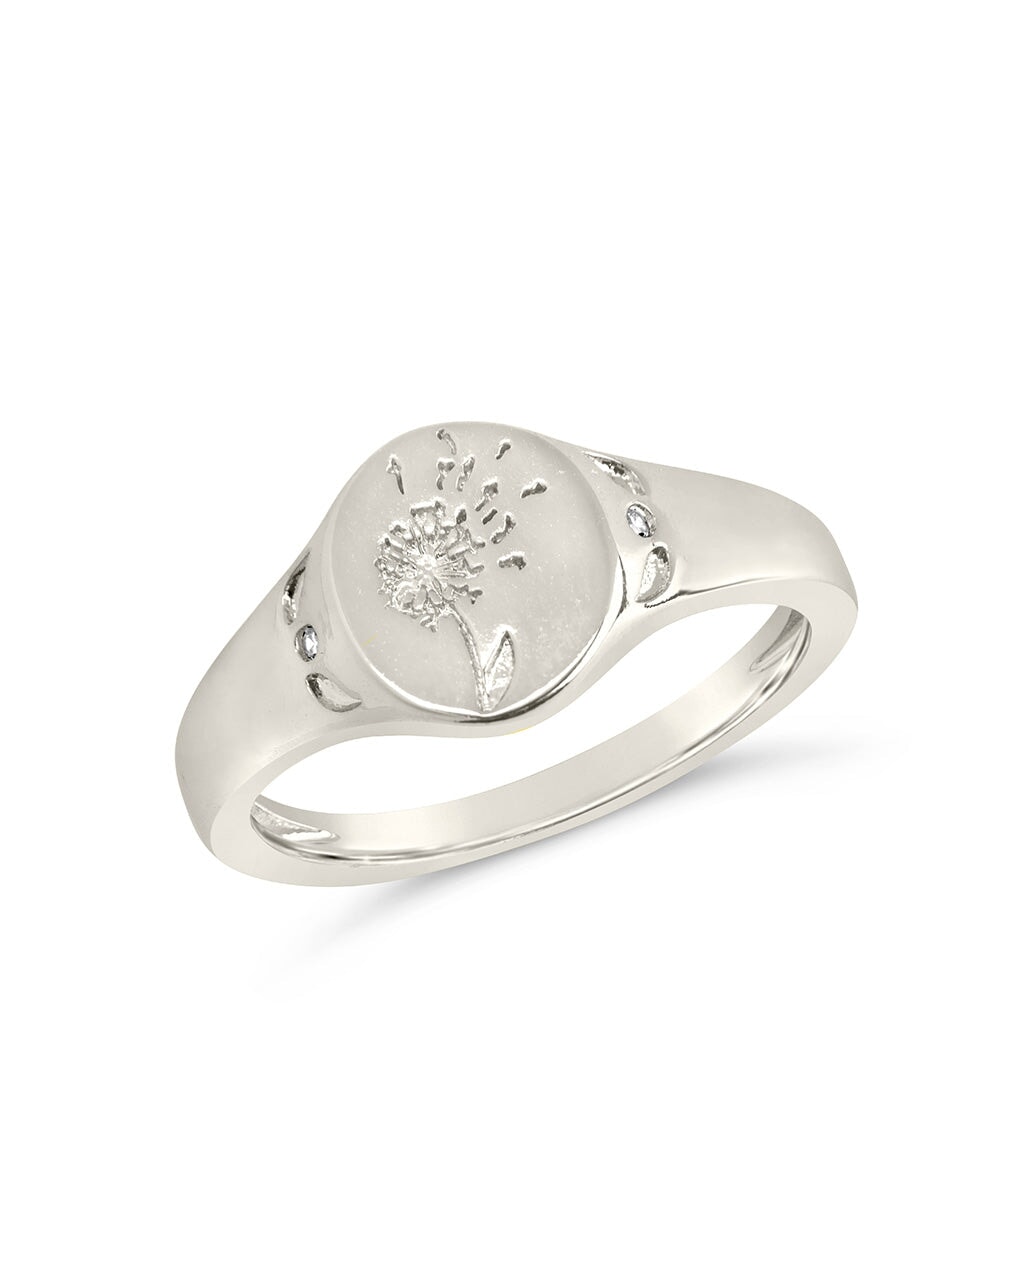 Make A Wish Signet Ring Ring Sterling Forever Silver 6 